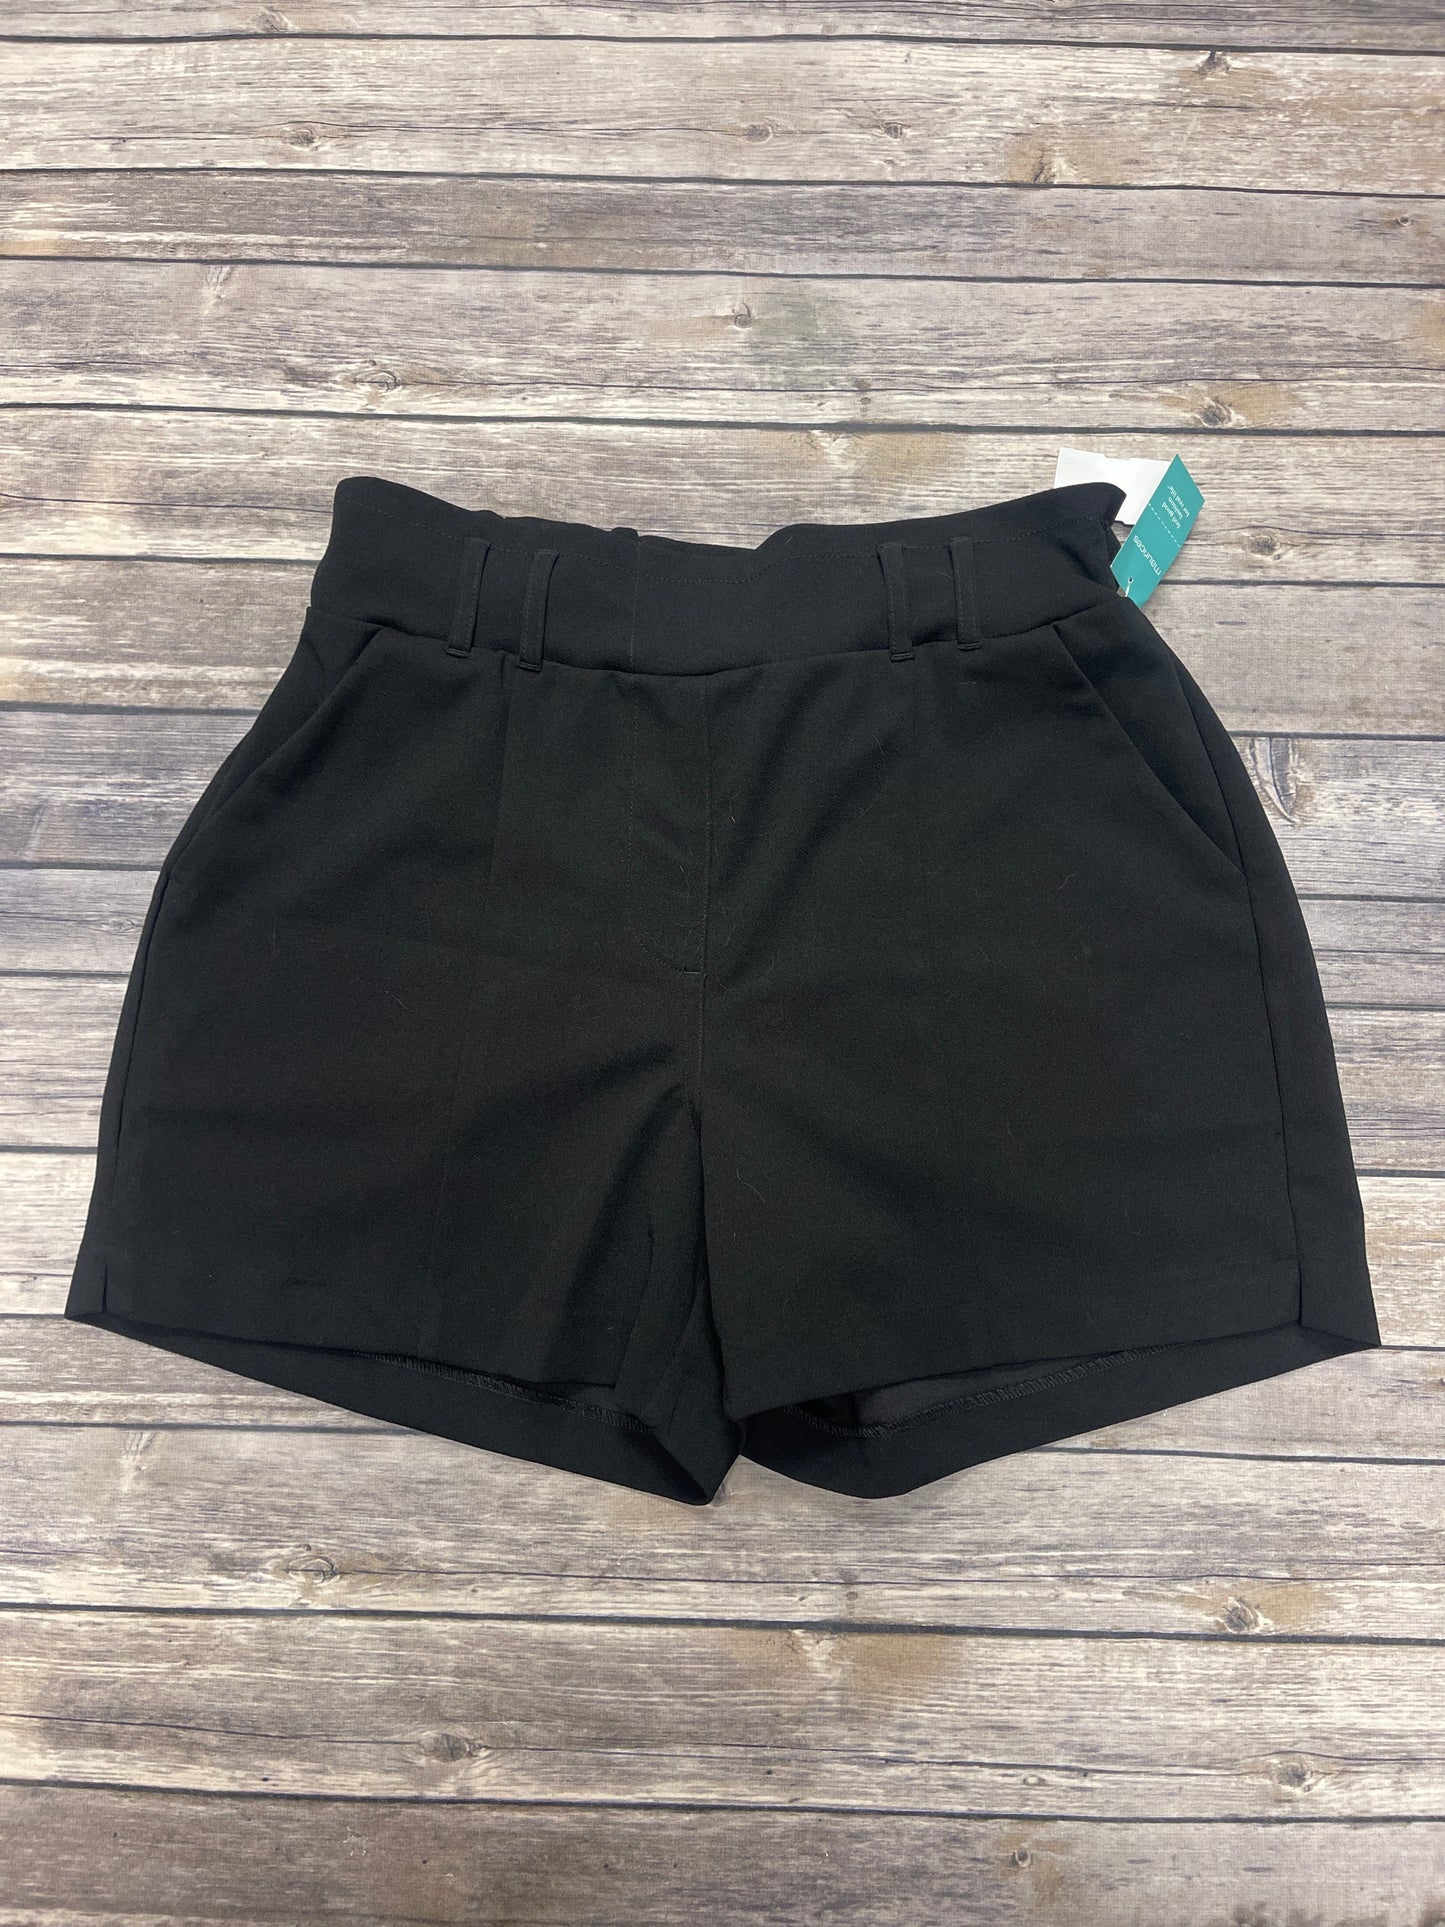 Black Shorts Maurices, Size M